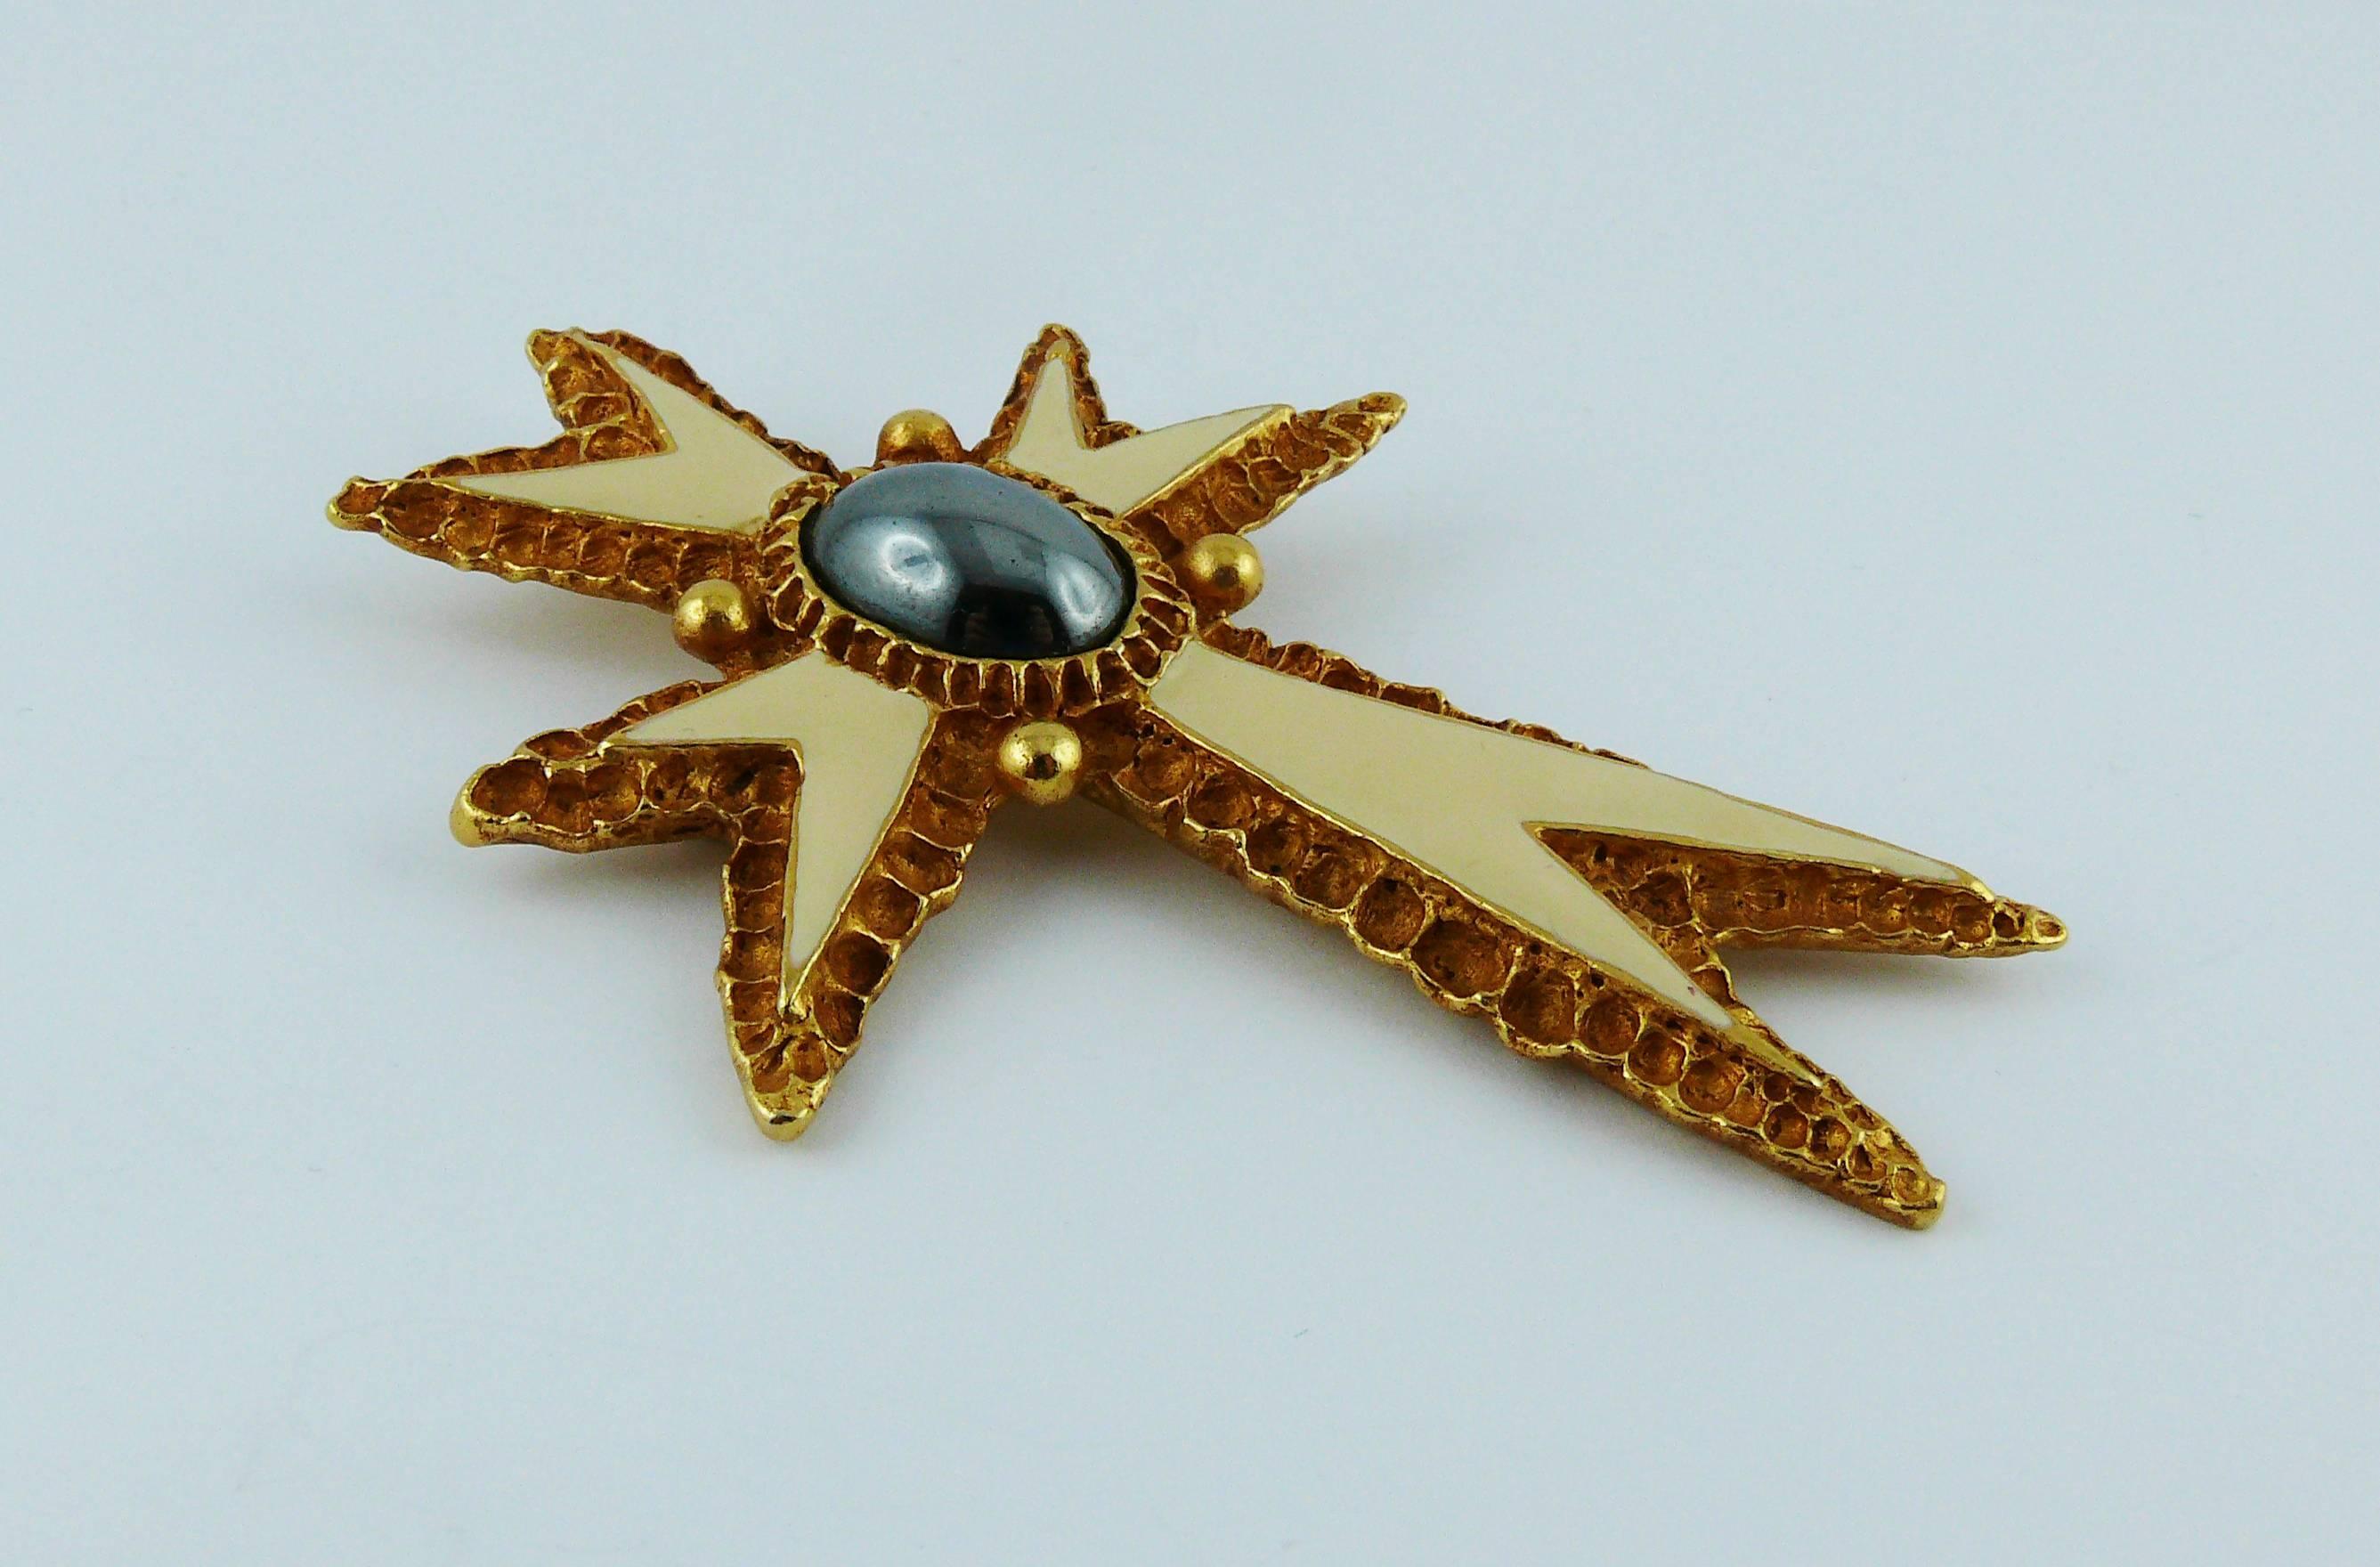 CHRISTIAN LACROIX vintage enamel cross brooch with hematite cabochon embellishement.

Marked CHRISTIAN LACROIX E94 Made in France.

Indicative measurements : height approx. 8.8 cm (3.46 inches) / max. width approx. 6.3 cm (2.48 inches).

JEWELRY